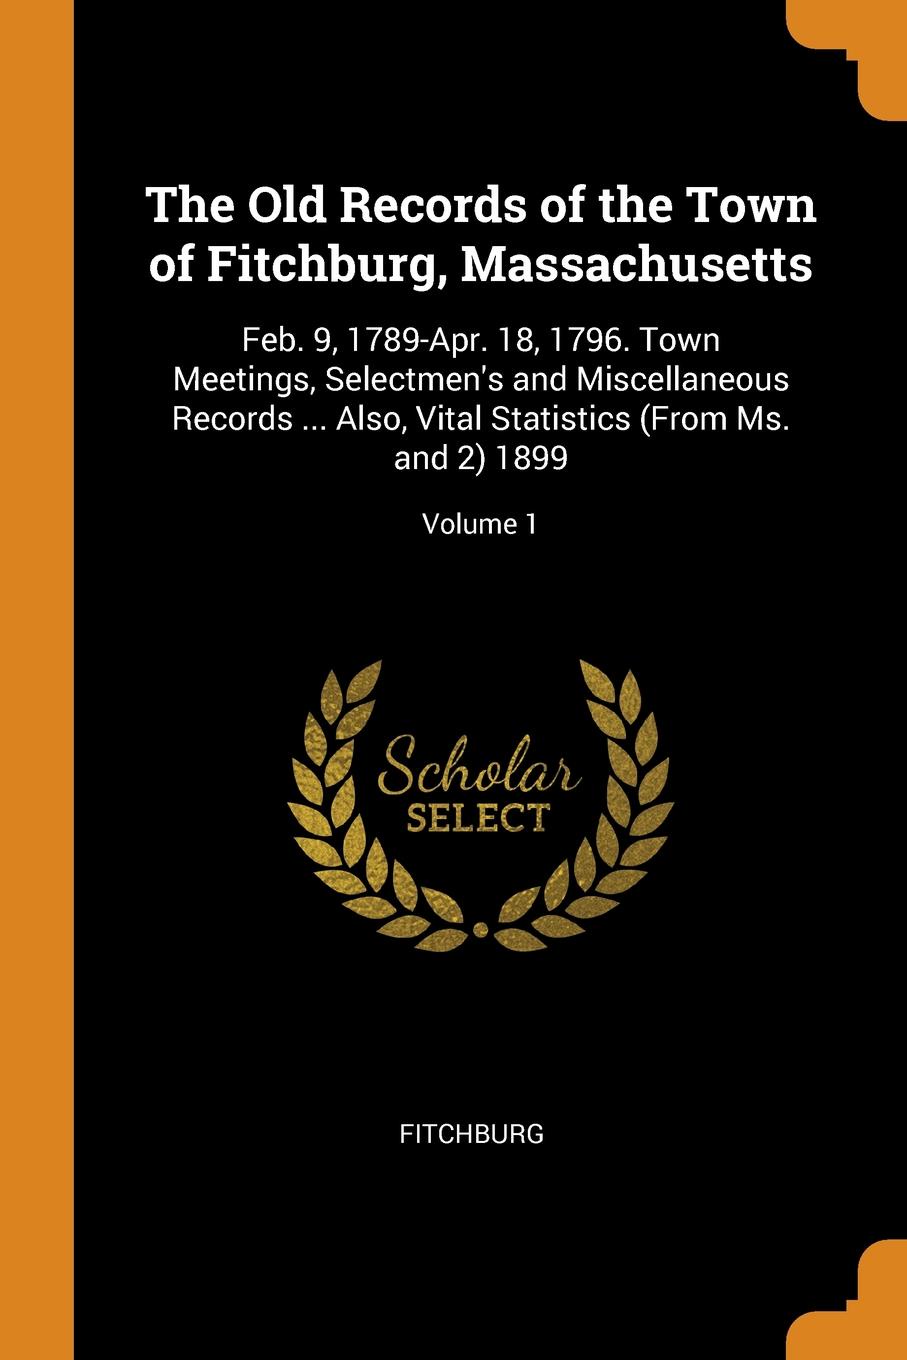 фото The Old Records of the Town of Fitchburg, Massachusetts. Feb. 9, 1789-Apr. 18, 1796. Town Meetings, Selectmen.s and Miscellaneous Records ... Also, Vital Statistics (From Ms. and 2) 1899; Volume 1